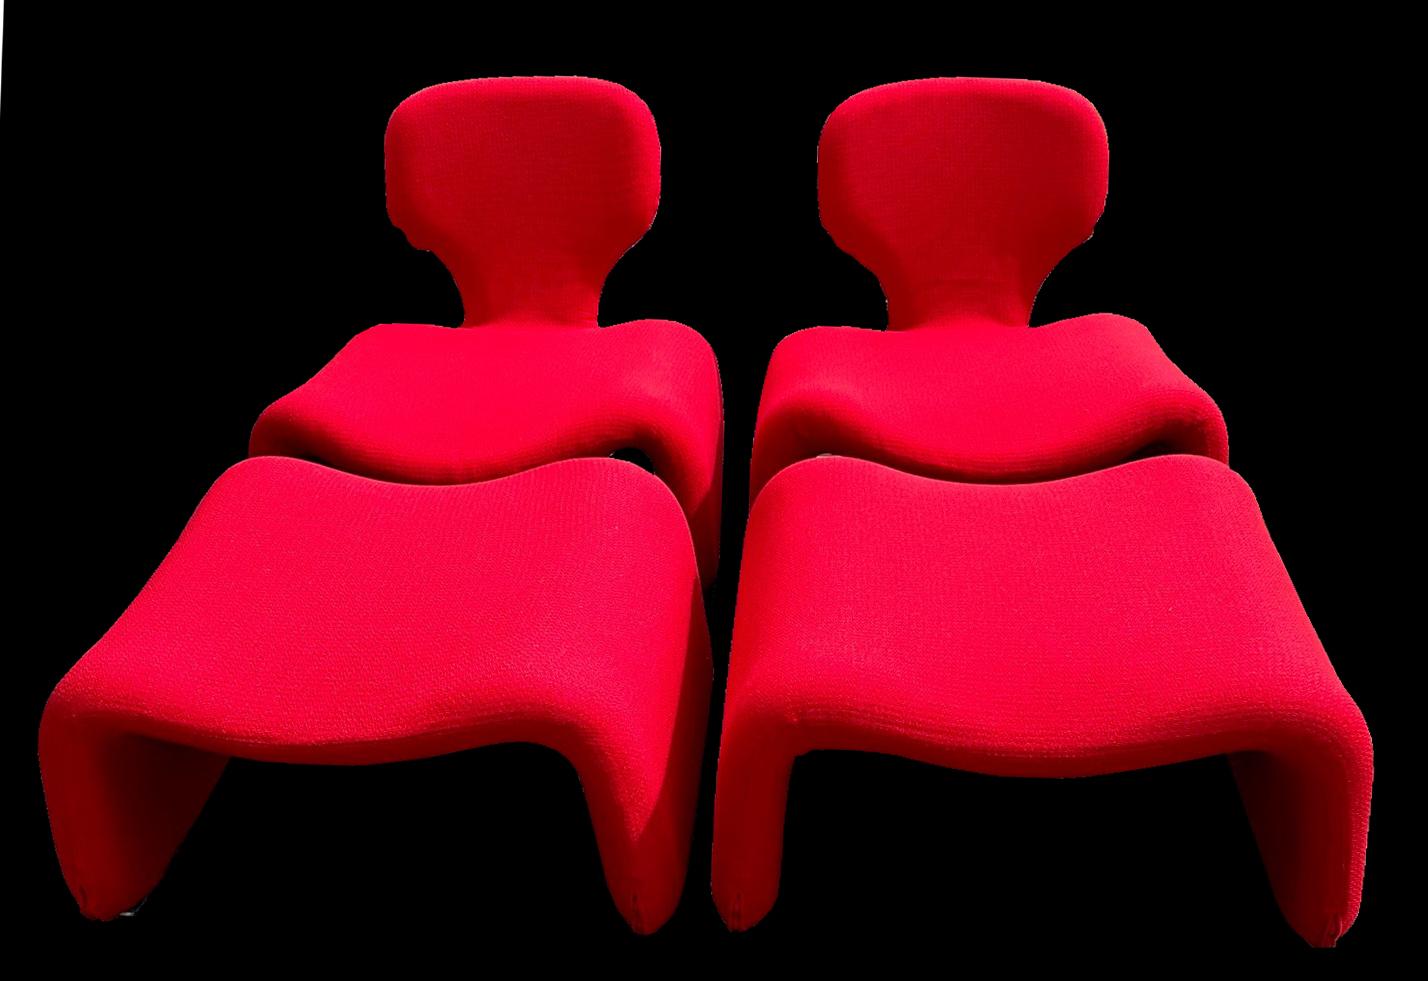 An original pair of Djinn chairs and footstools by Olivier Mourgue for Airborne, as seen in 2001 a space odyssey, freshly reupholsterd in Knoll Stretch fabric.